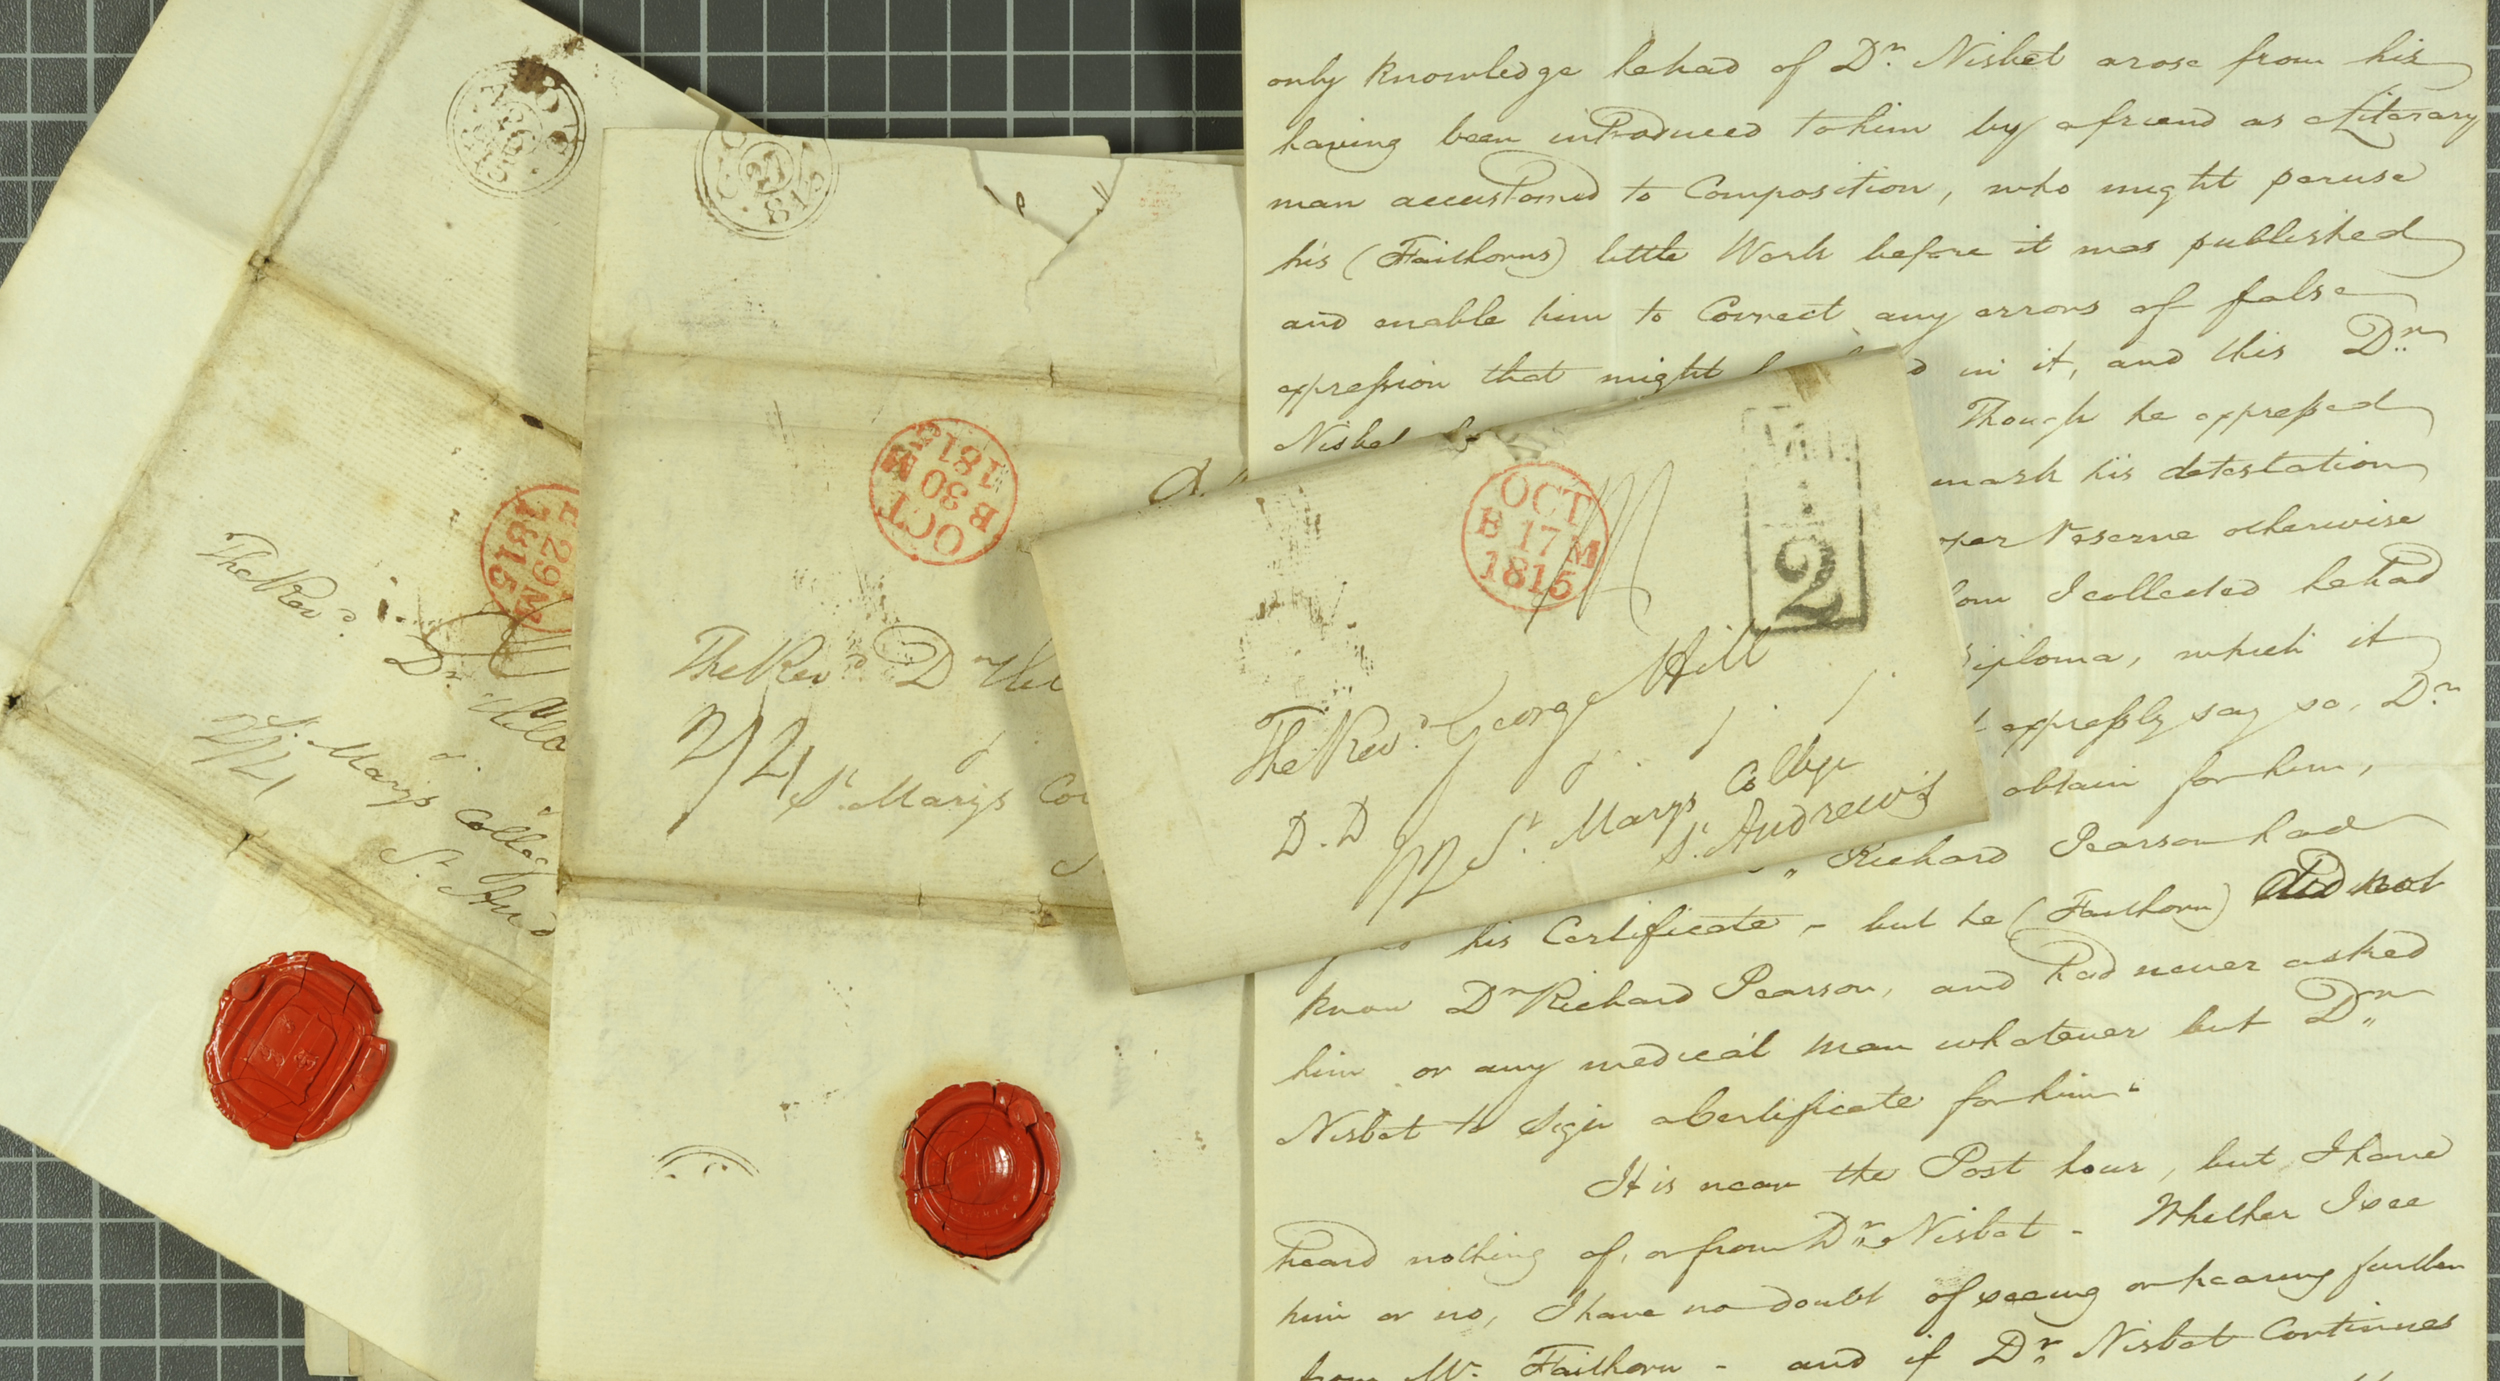 Correspondence relating to forged MD testimonial, 1815